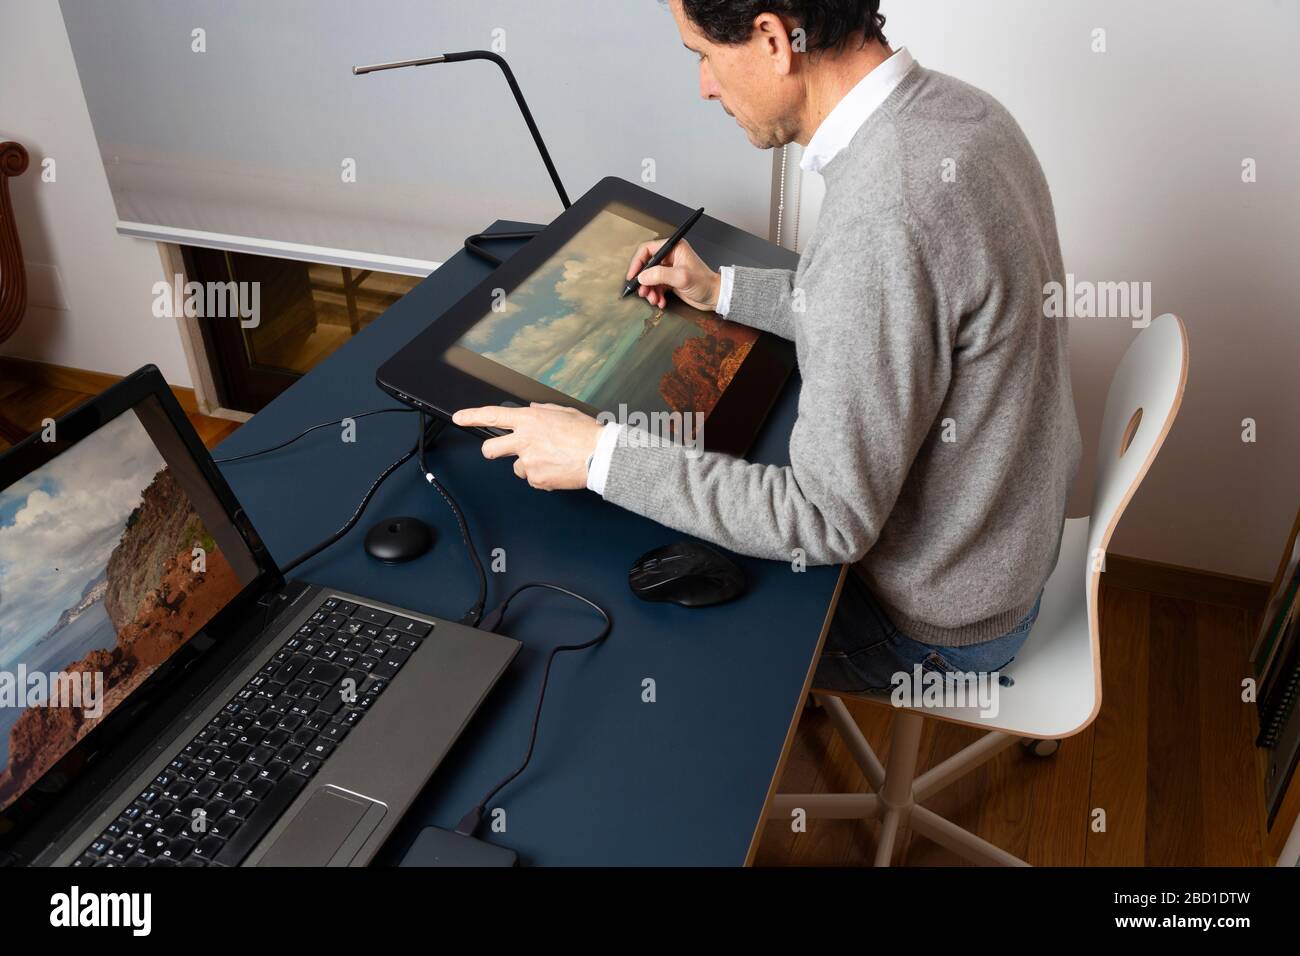 50 year old man working at home, at different times of the day Stock Photo